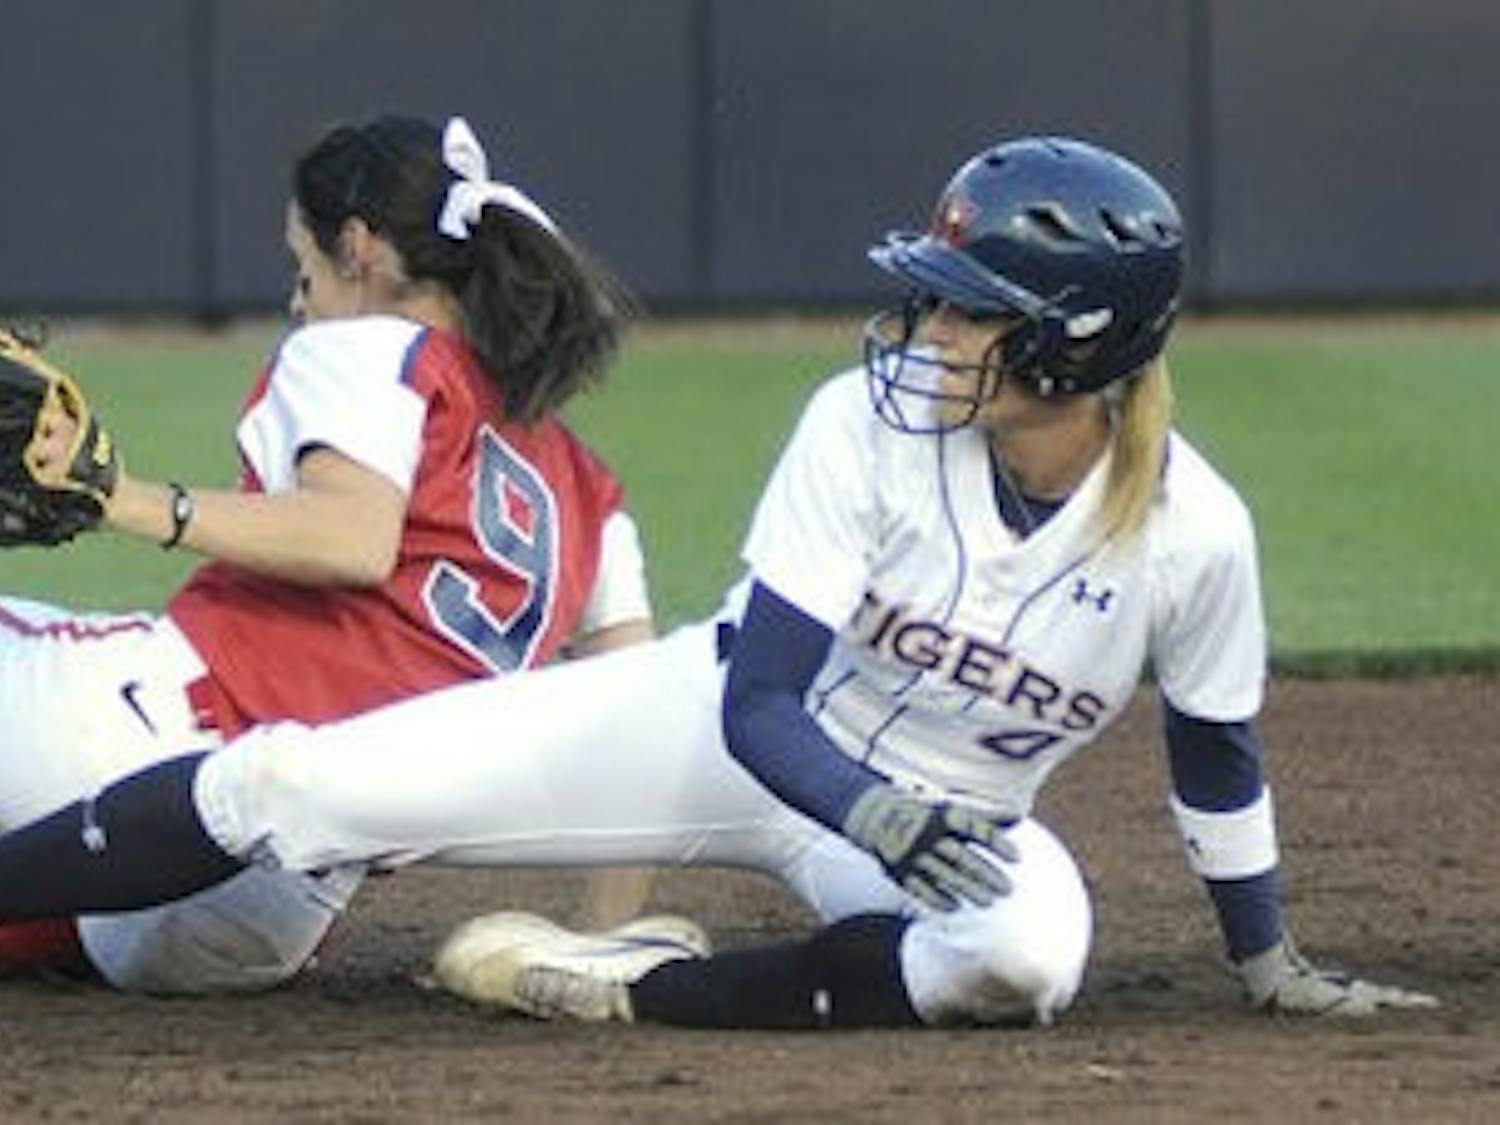 Sophomore outfielder Baylee Stephens steals second base in the bottom of the second inning against Ole Miss. (Leffie Dailey / Auburn Media Relations)